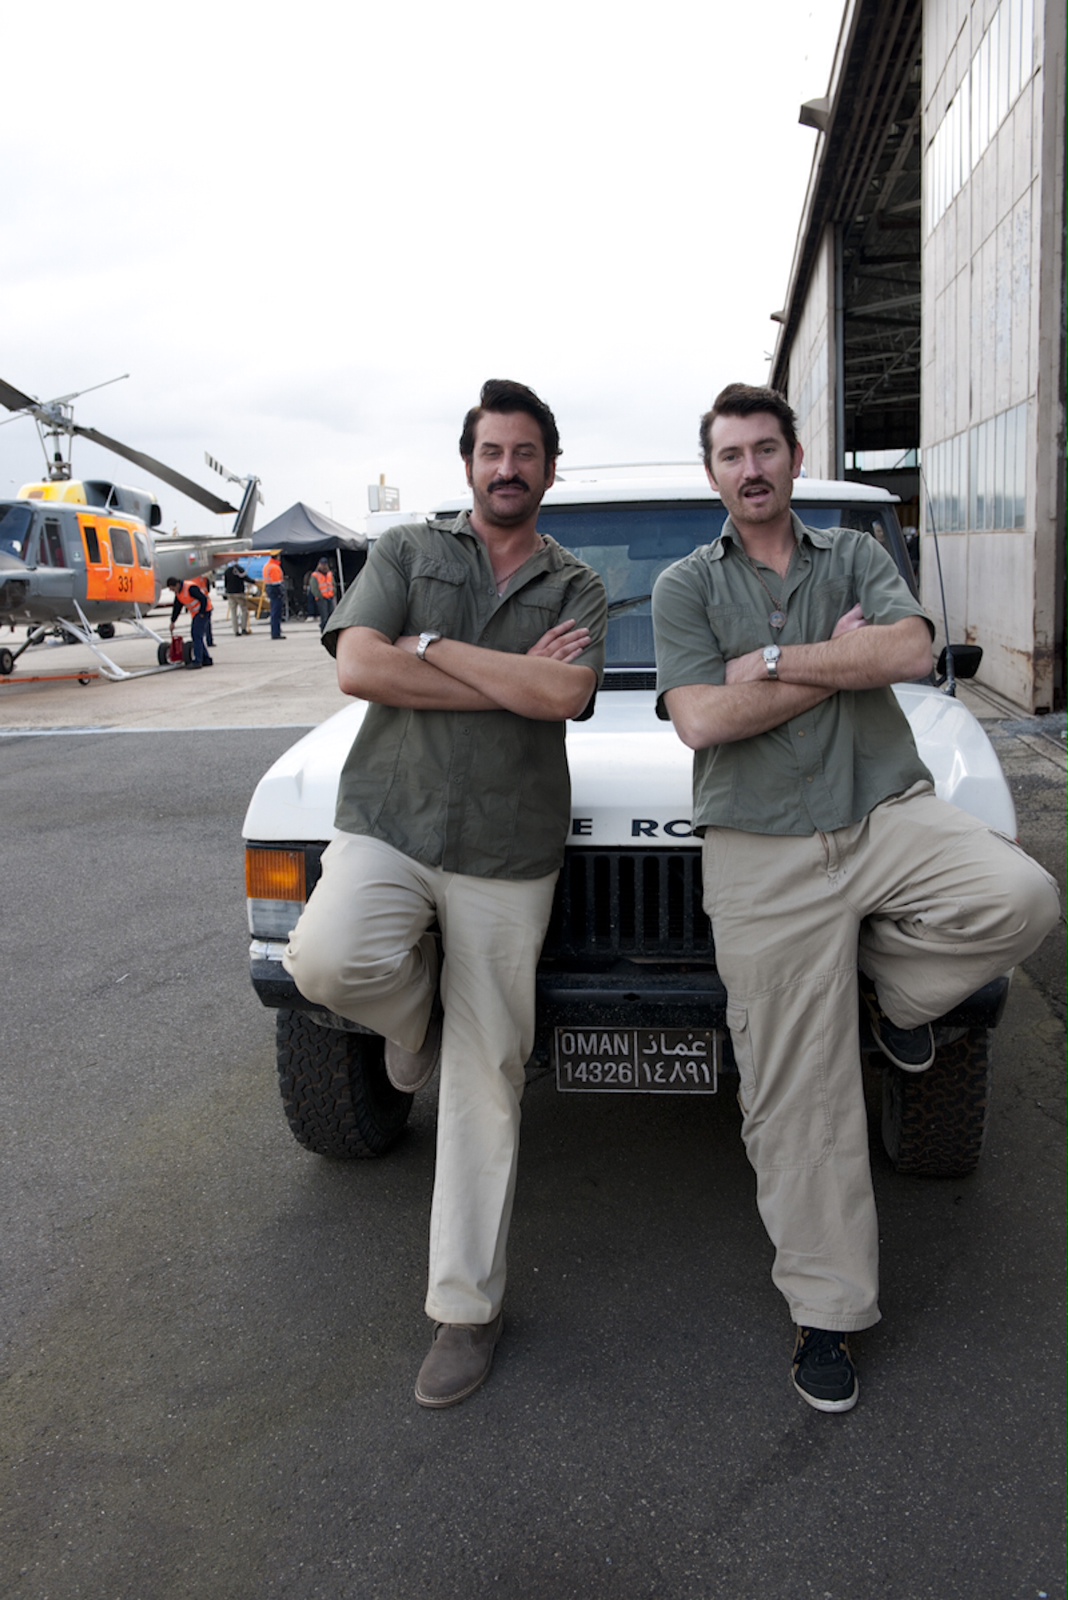 Lachy Hulme and Michael M. Foster on location in Melbourne, filming Killer Elite. (2010, Driving Double)